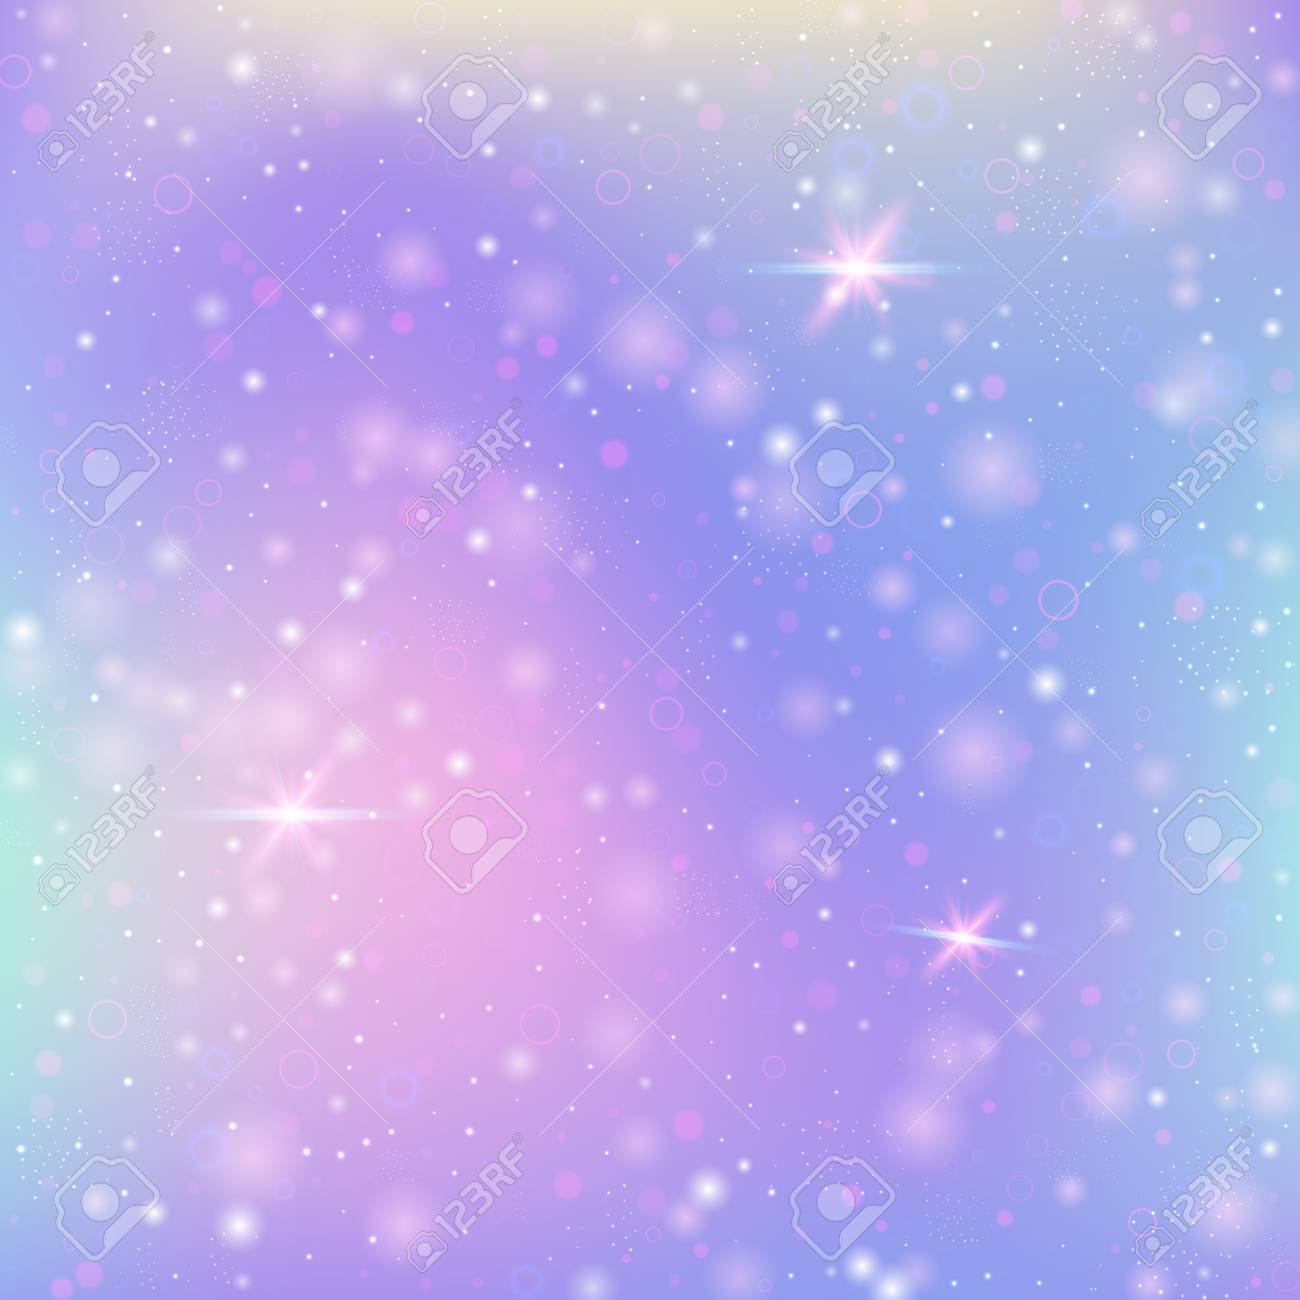 Fairy Background With Rainbow Mesh Cute Universe Banner In